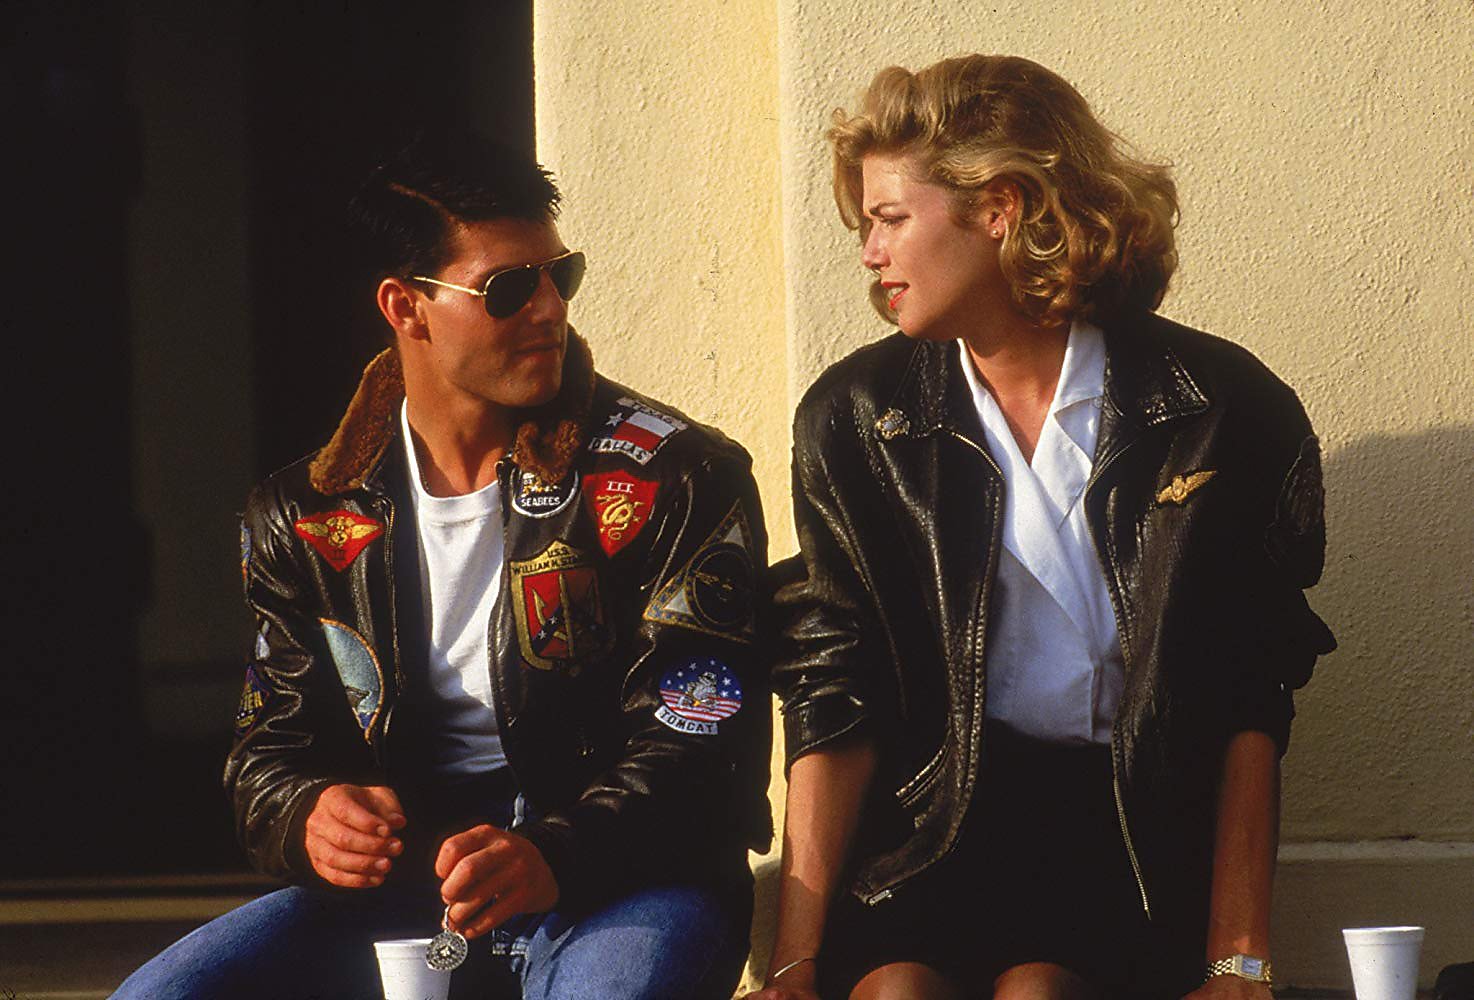 Top Guns 2011 Full Movie - Tony Scott is the underrated king of '80s and '90s blockbuster movies